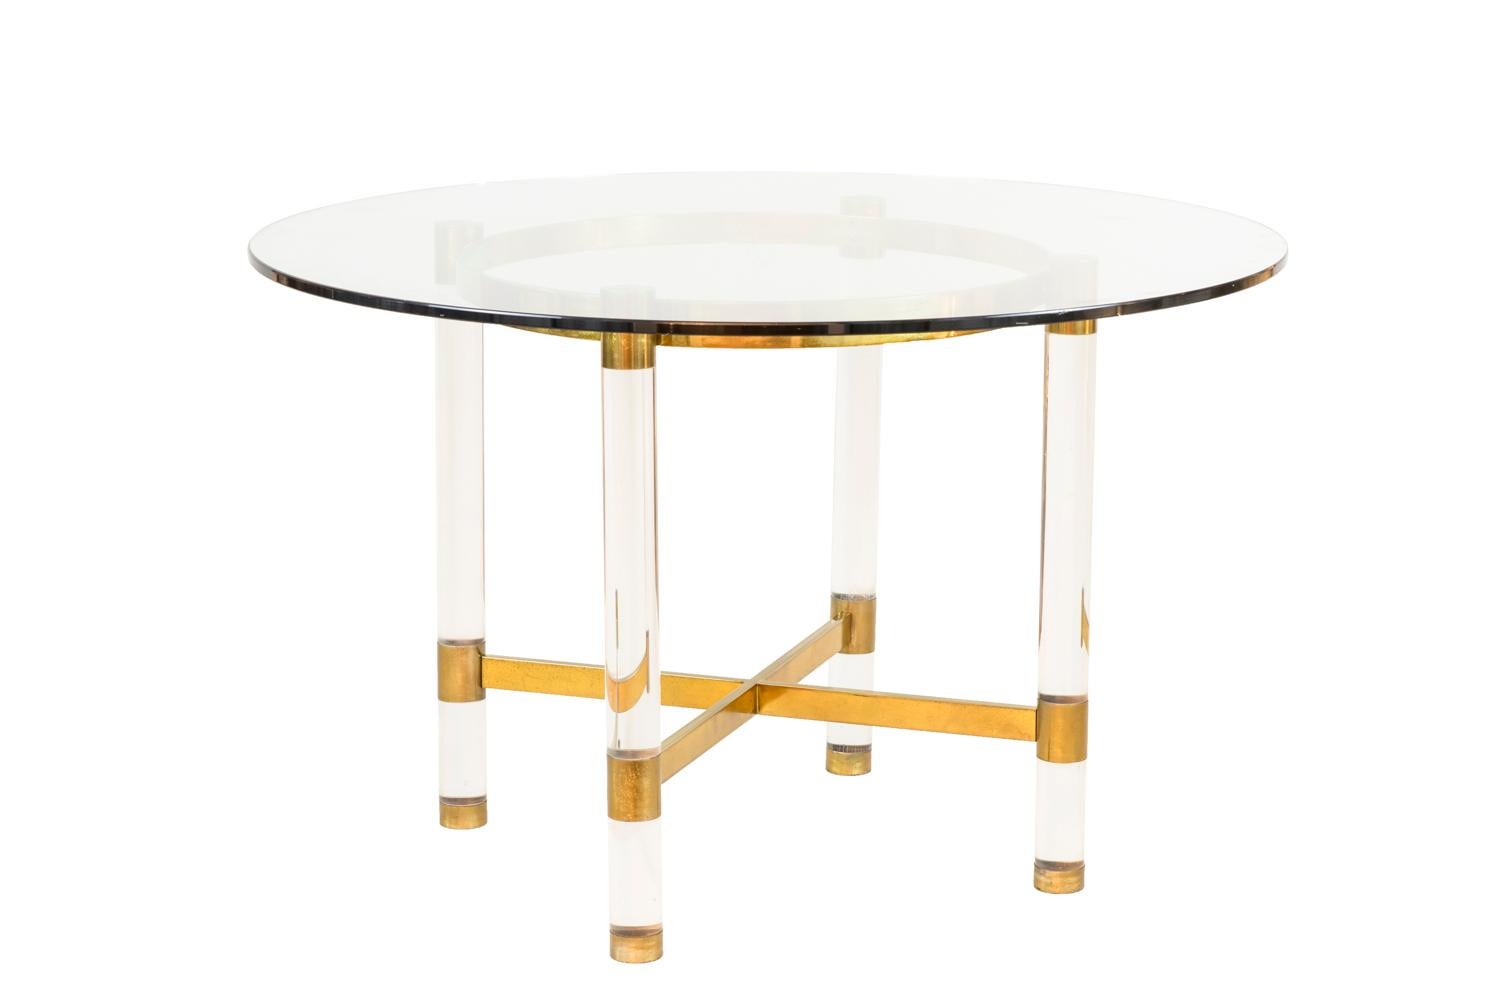 Sandro Petti for Metalarte, attributed to.

Circular stand in Lucite and gilt brass standing on four Lucite tubular shape legs linked to each other by an X-gilt brass stretcher fixed to legs thanks to brass rings. Legs are also connected at the